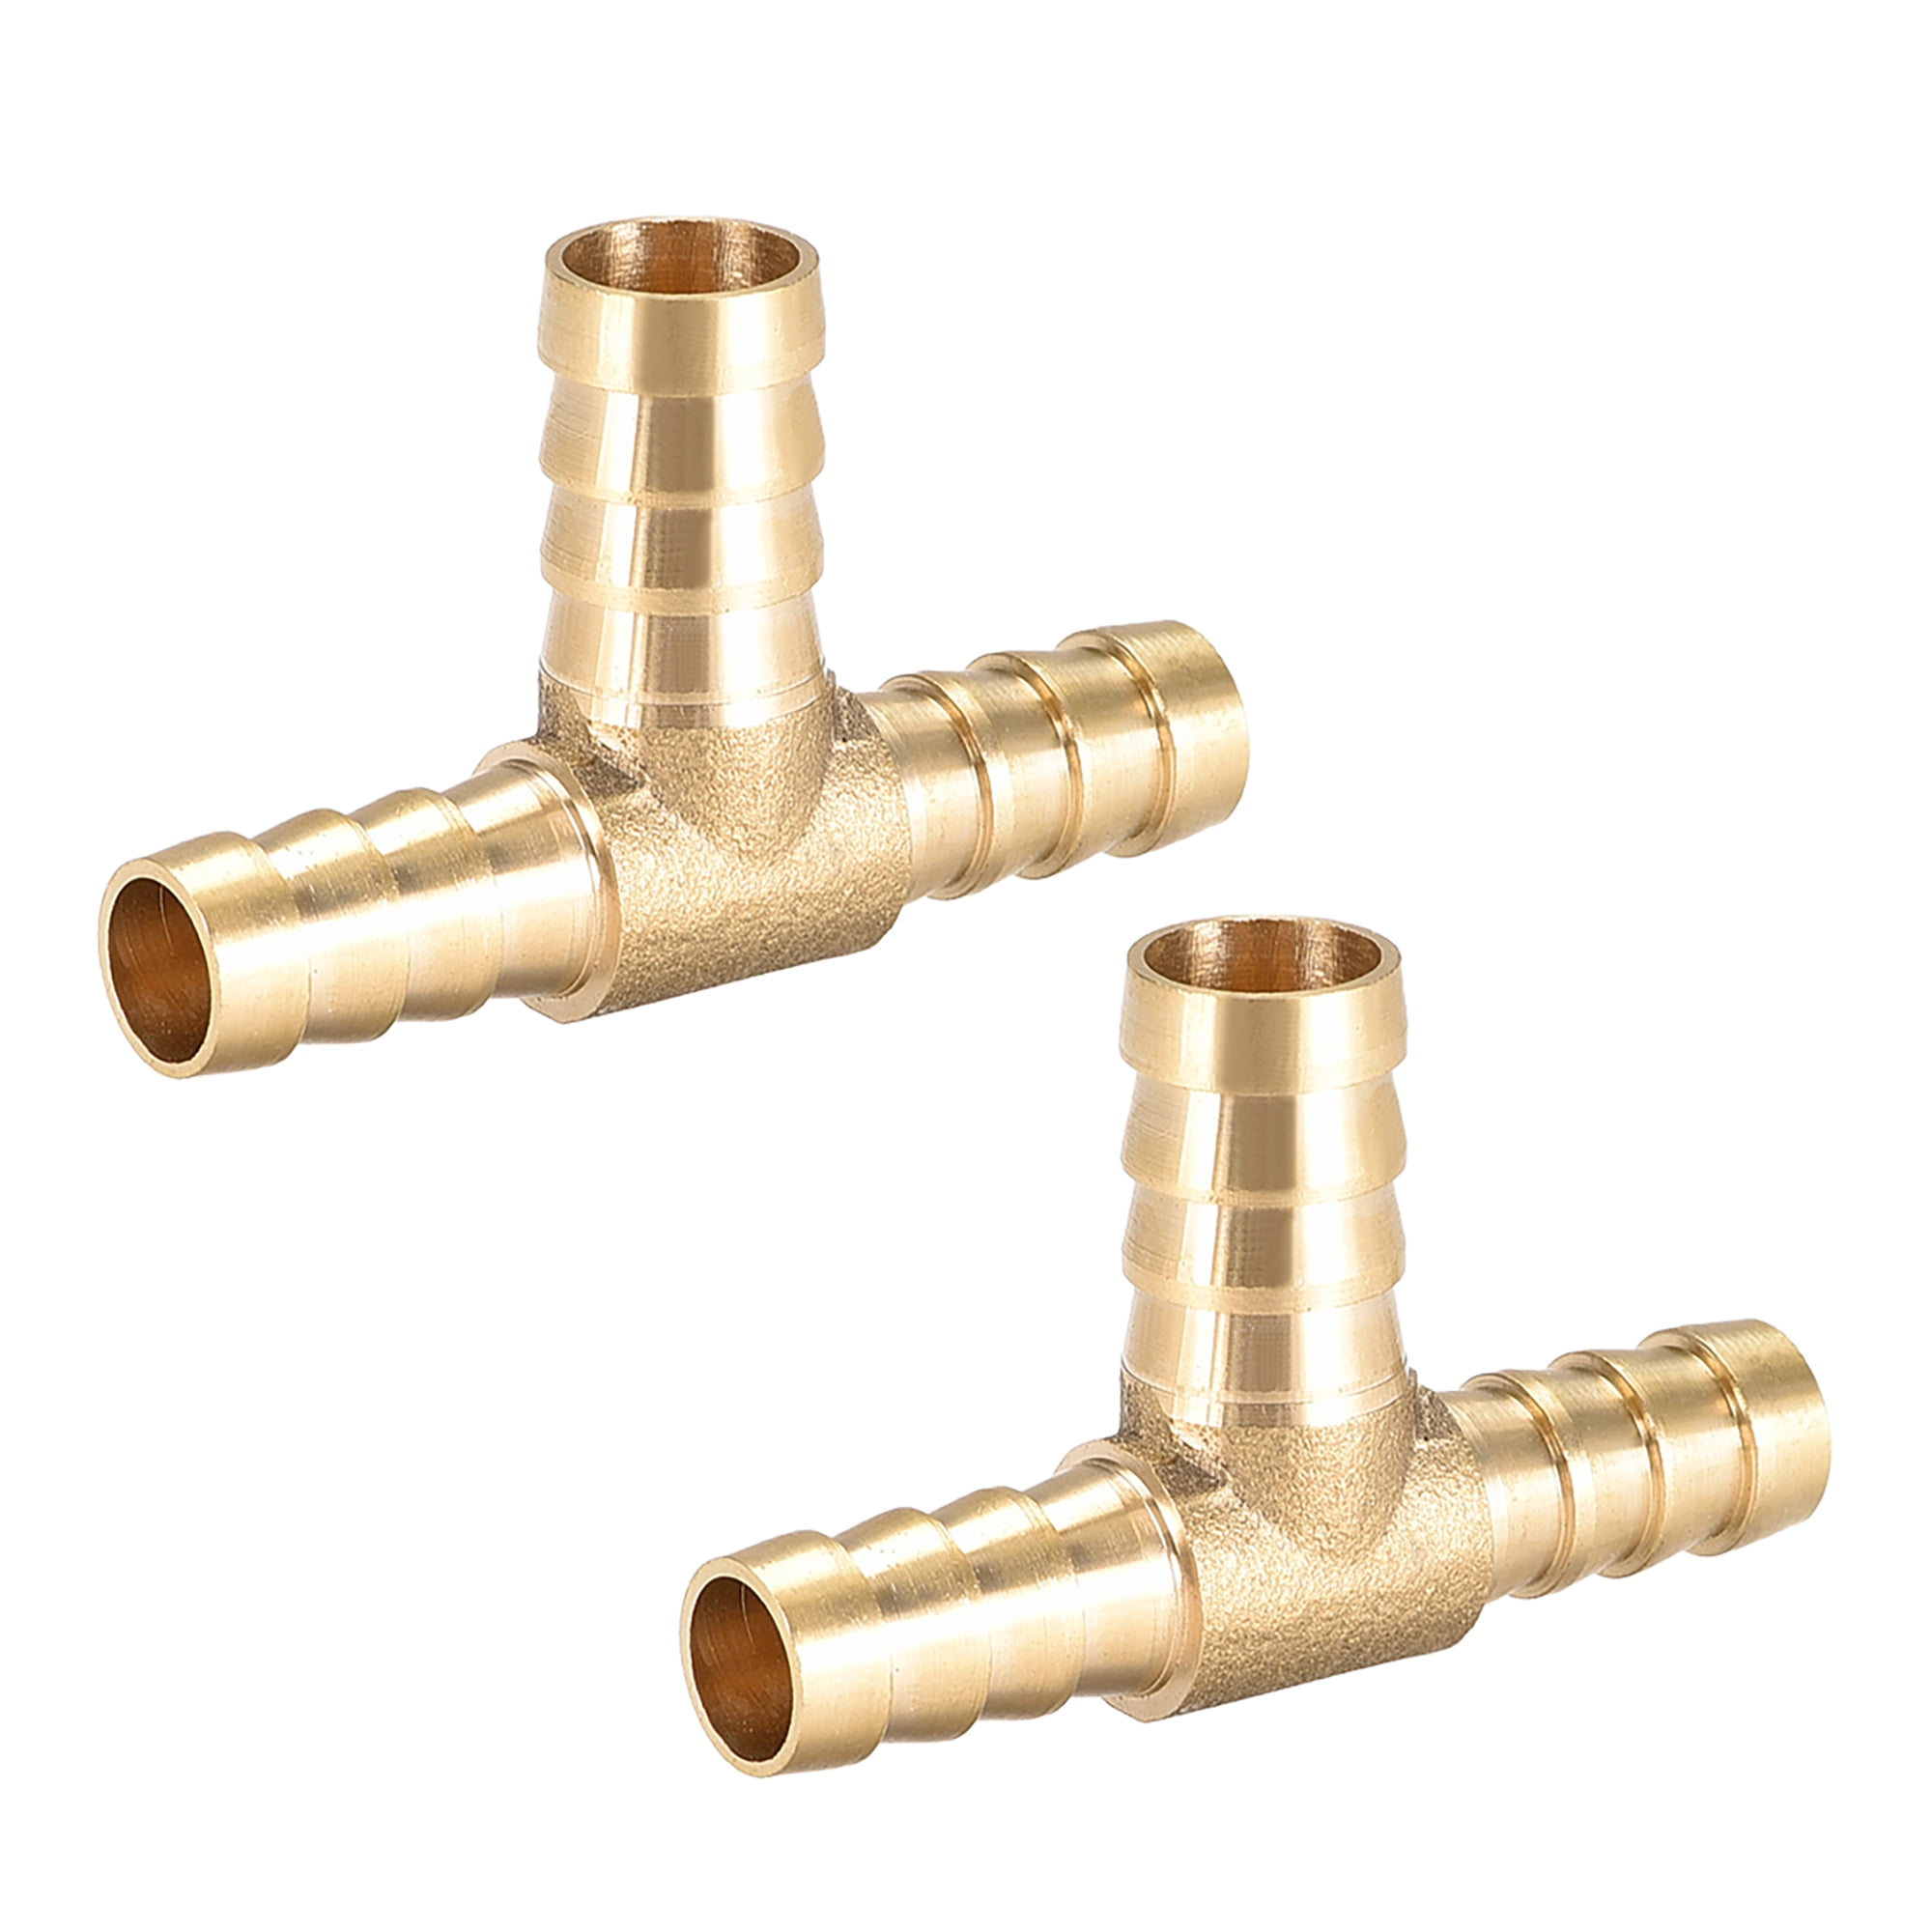 Brass Bulkhead Fitting Barb Hose Tube Connector Fuel Water Air Boat 6-25mm